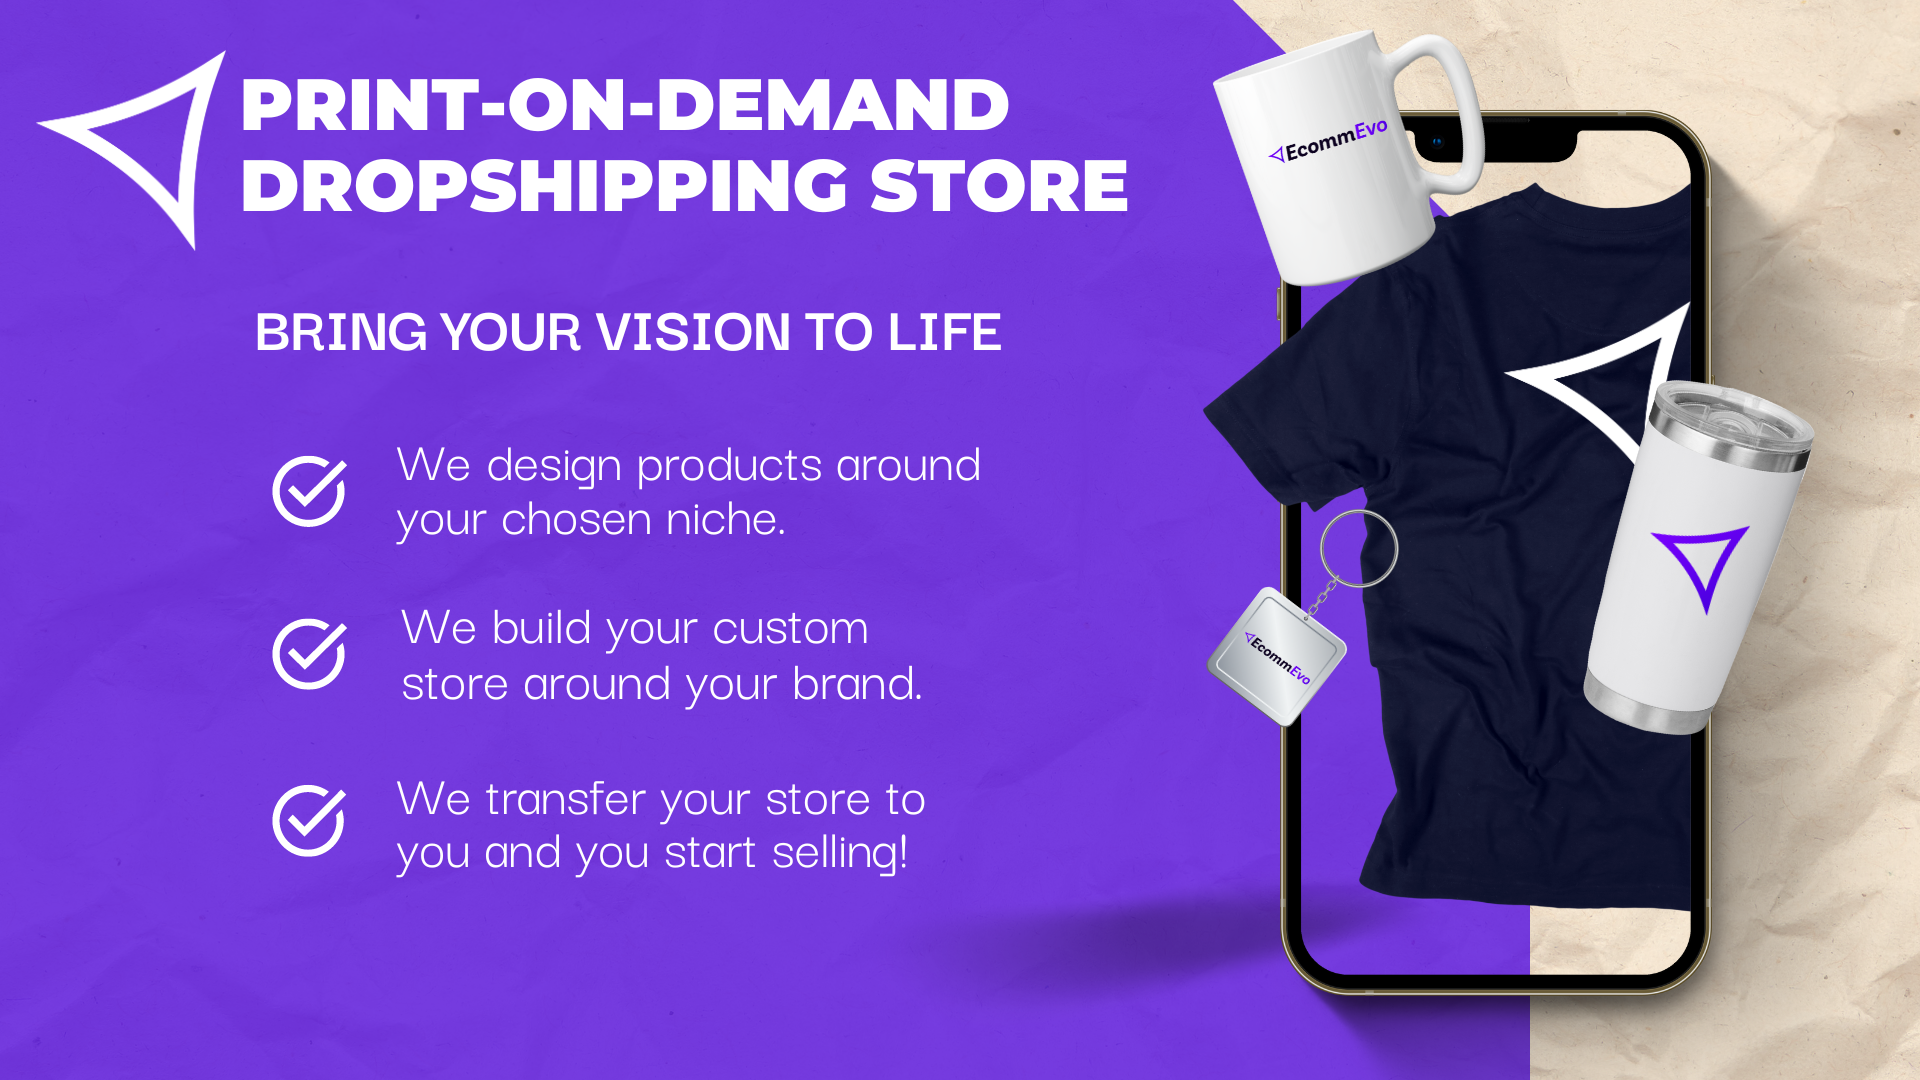 Print-On-Demand Dropshipping Store